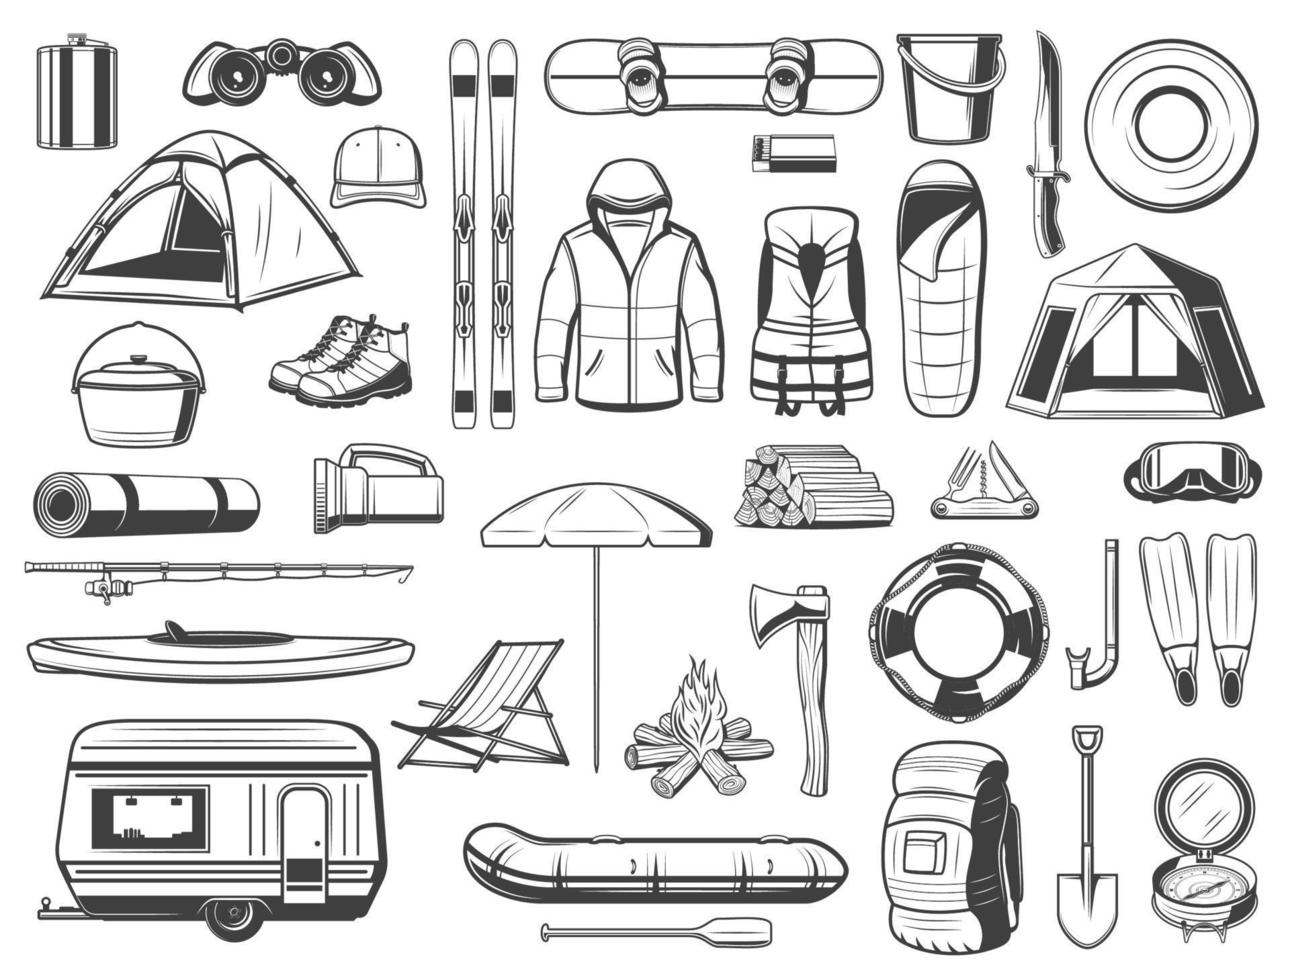 Travel and tourism equipment isolated vector icons